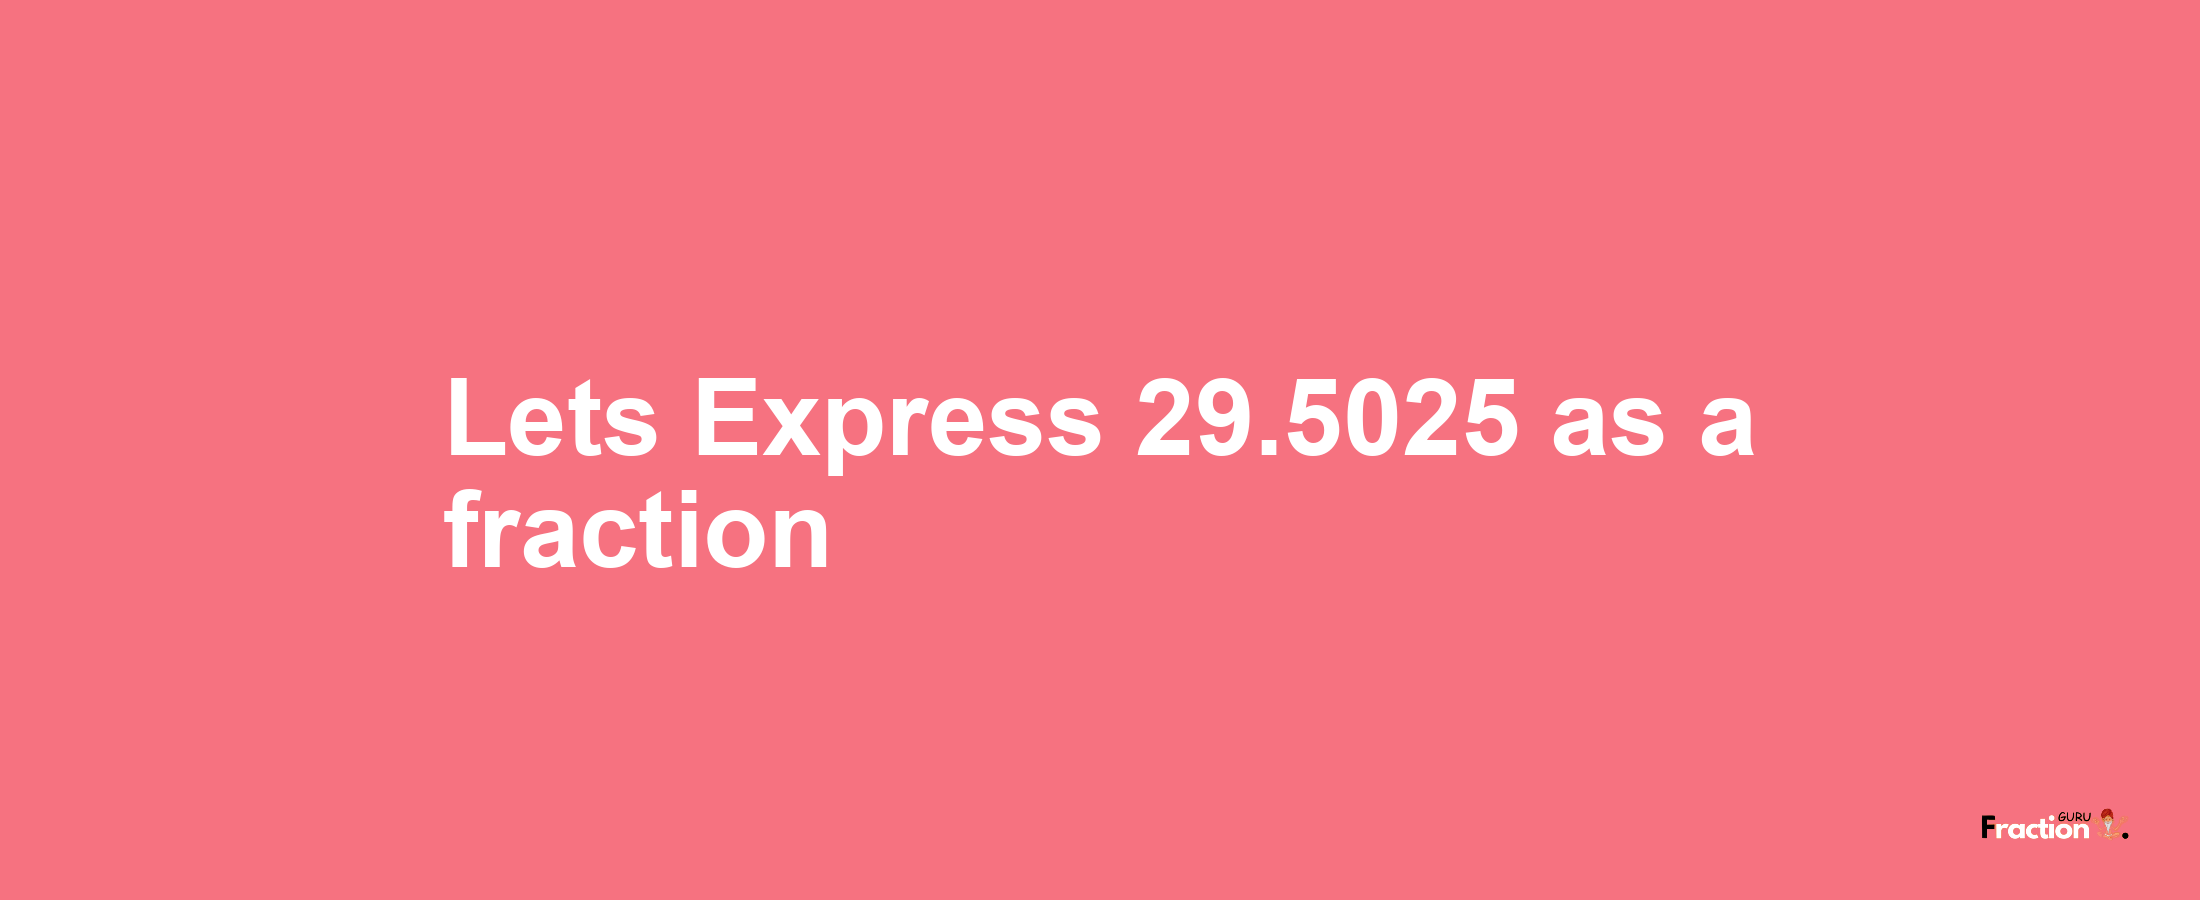 Lets Express 29.5025 as afraction